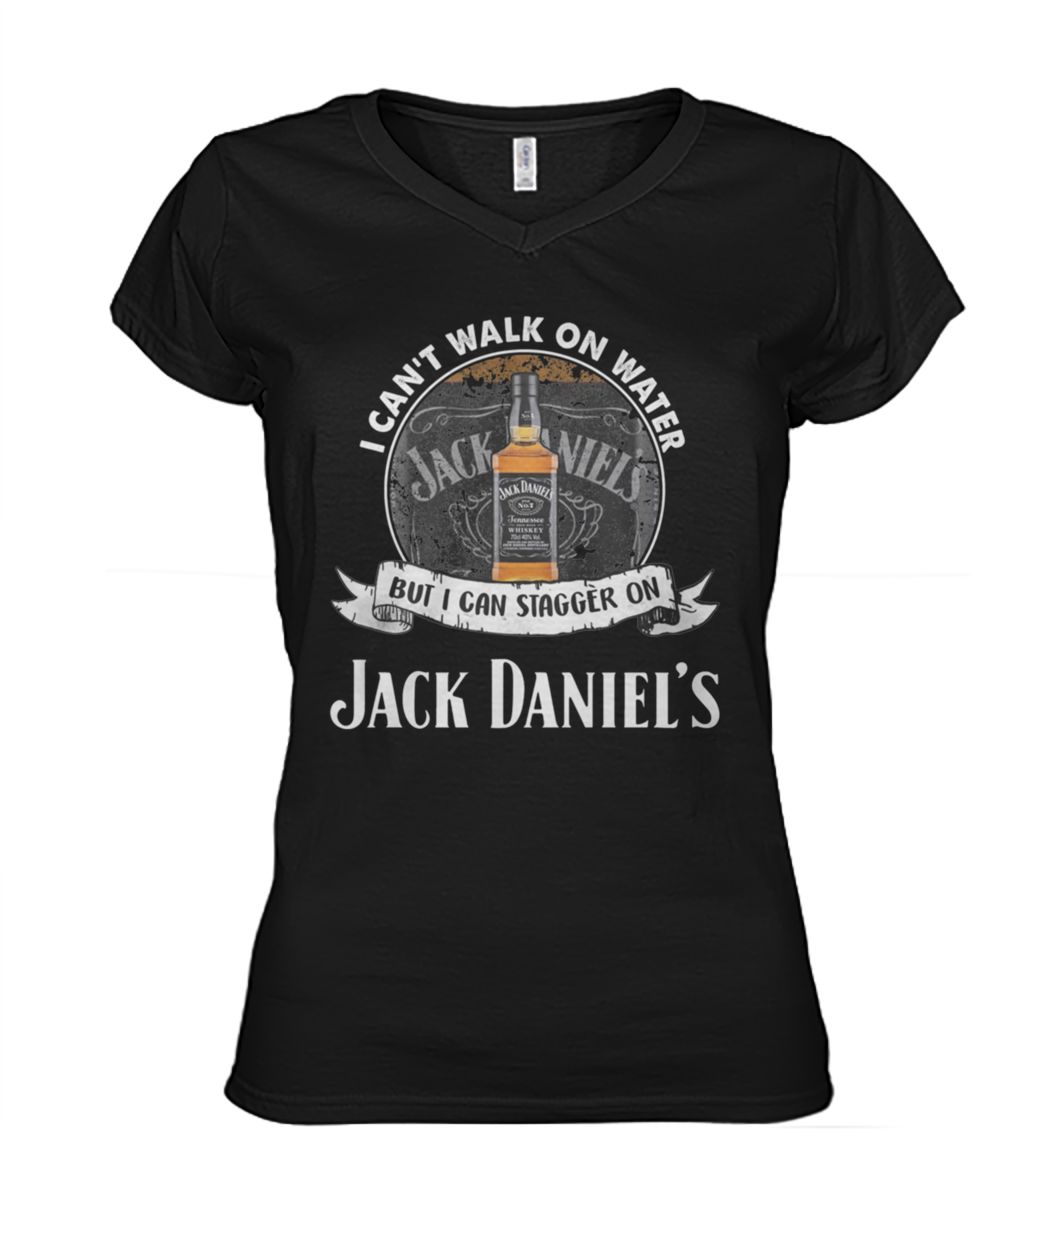 I can't walk on water but I can stagger on jack daniel's women's v-neck